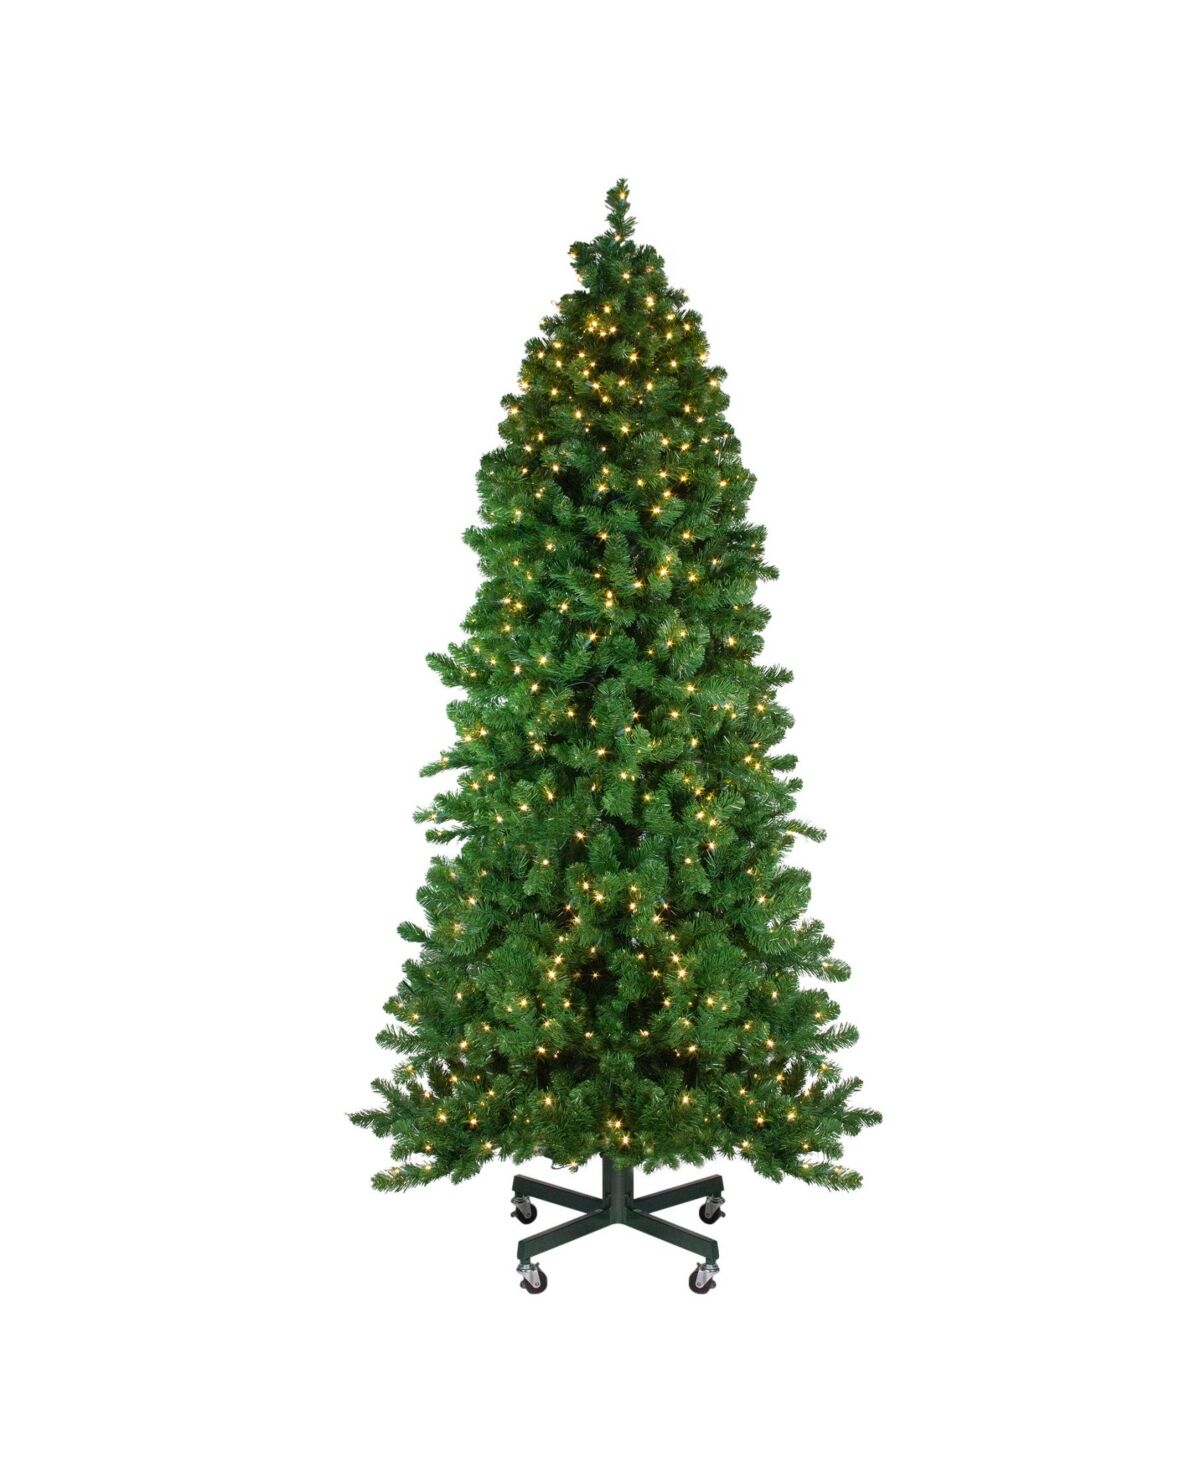 Northlight 7.5' Pre-Lit Olympia Pine Artificial Christmas Tree - Warm White Led Lights - Green